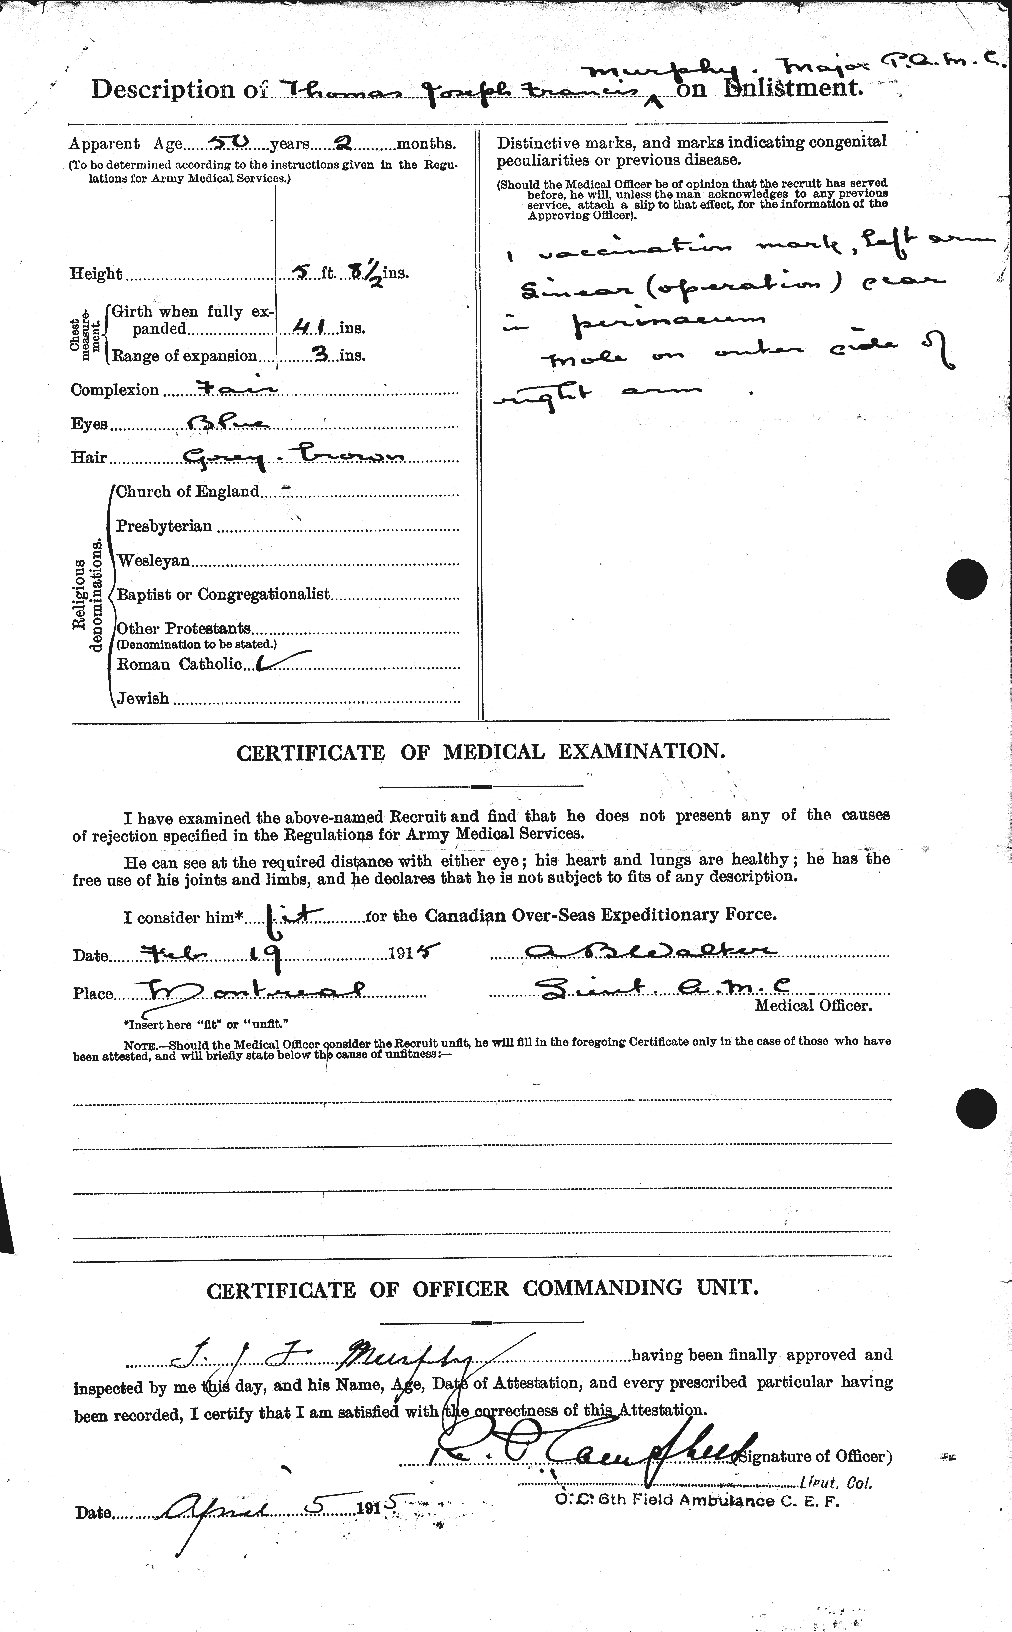 Personnel Records of the First World War - CEF 512259b